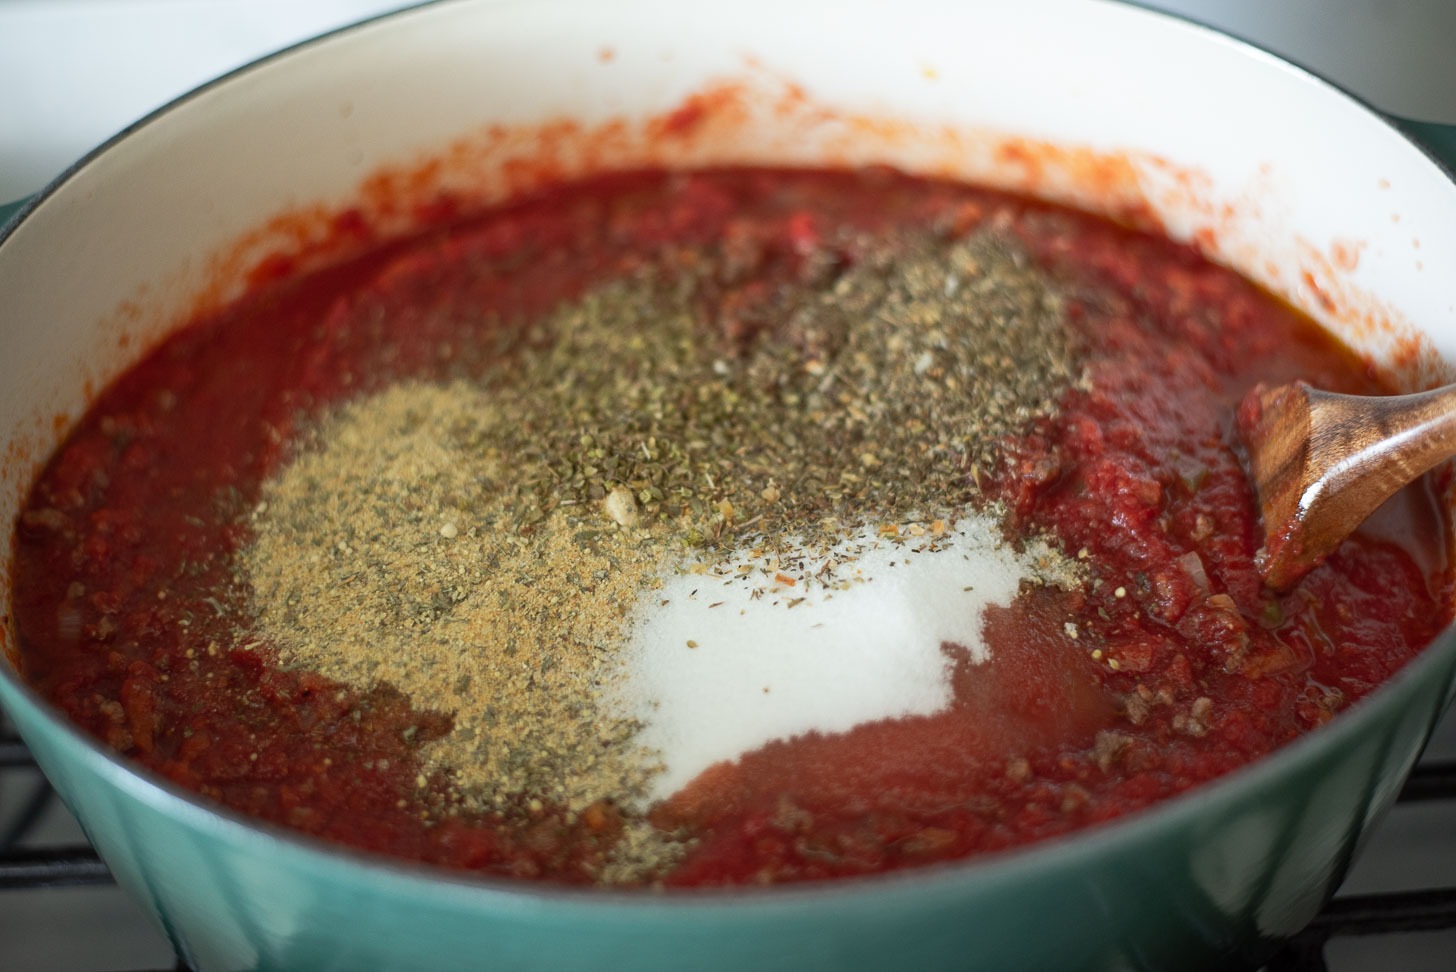 Canned crushed tomatoes and spices are added to beef and veggies in a pot.